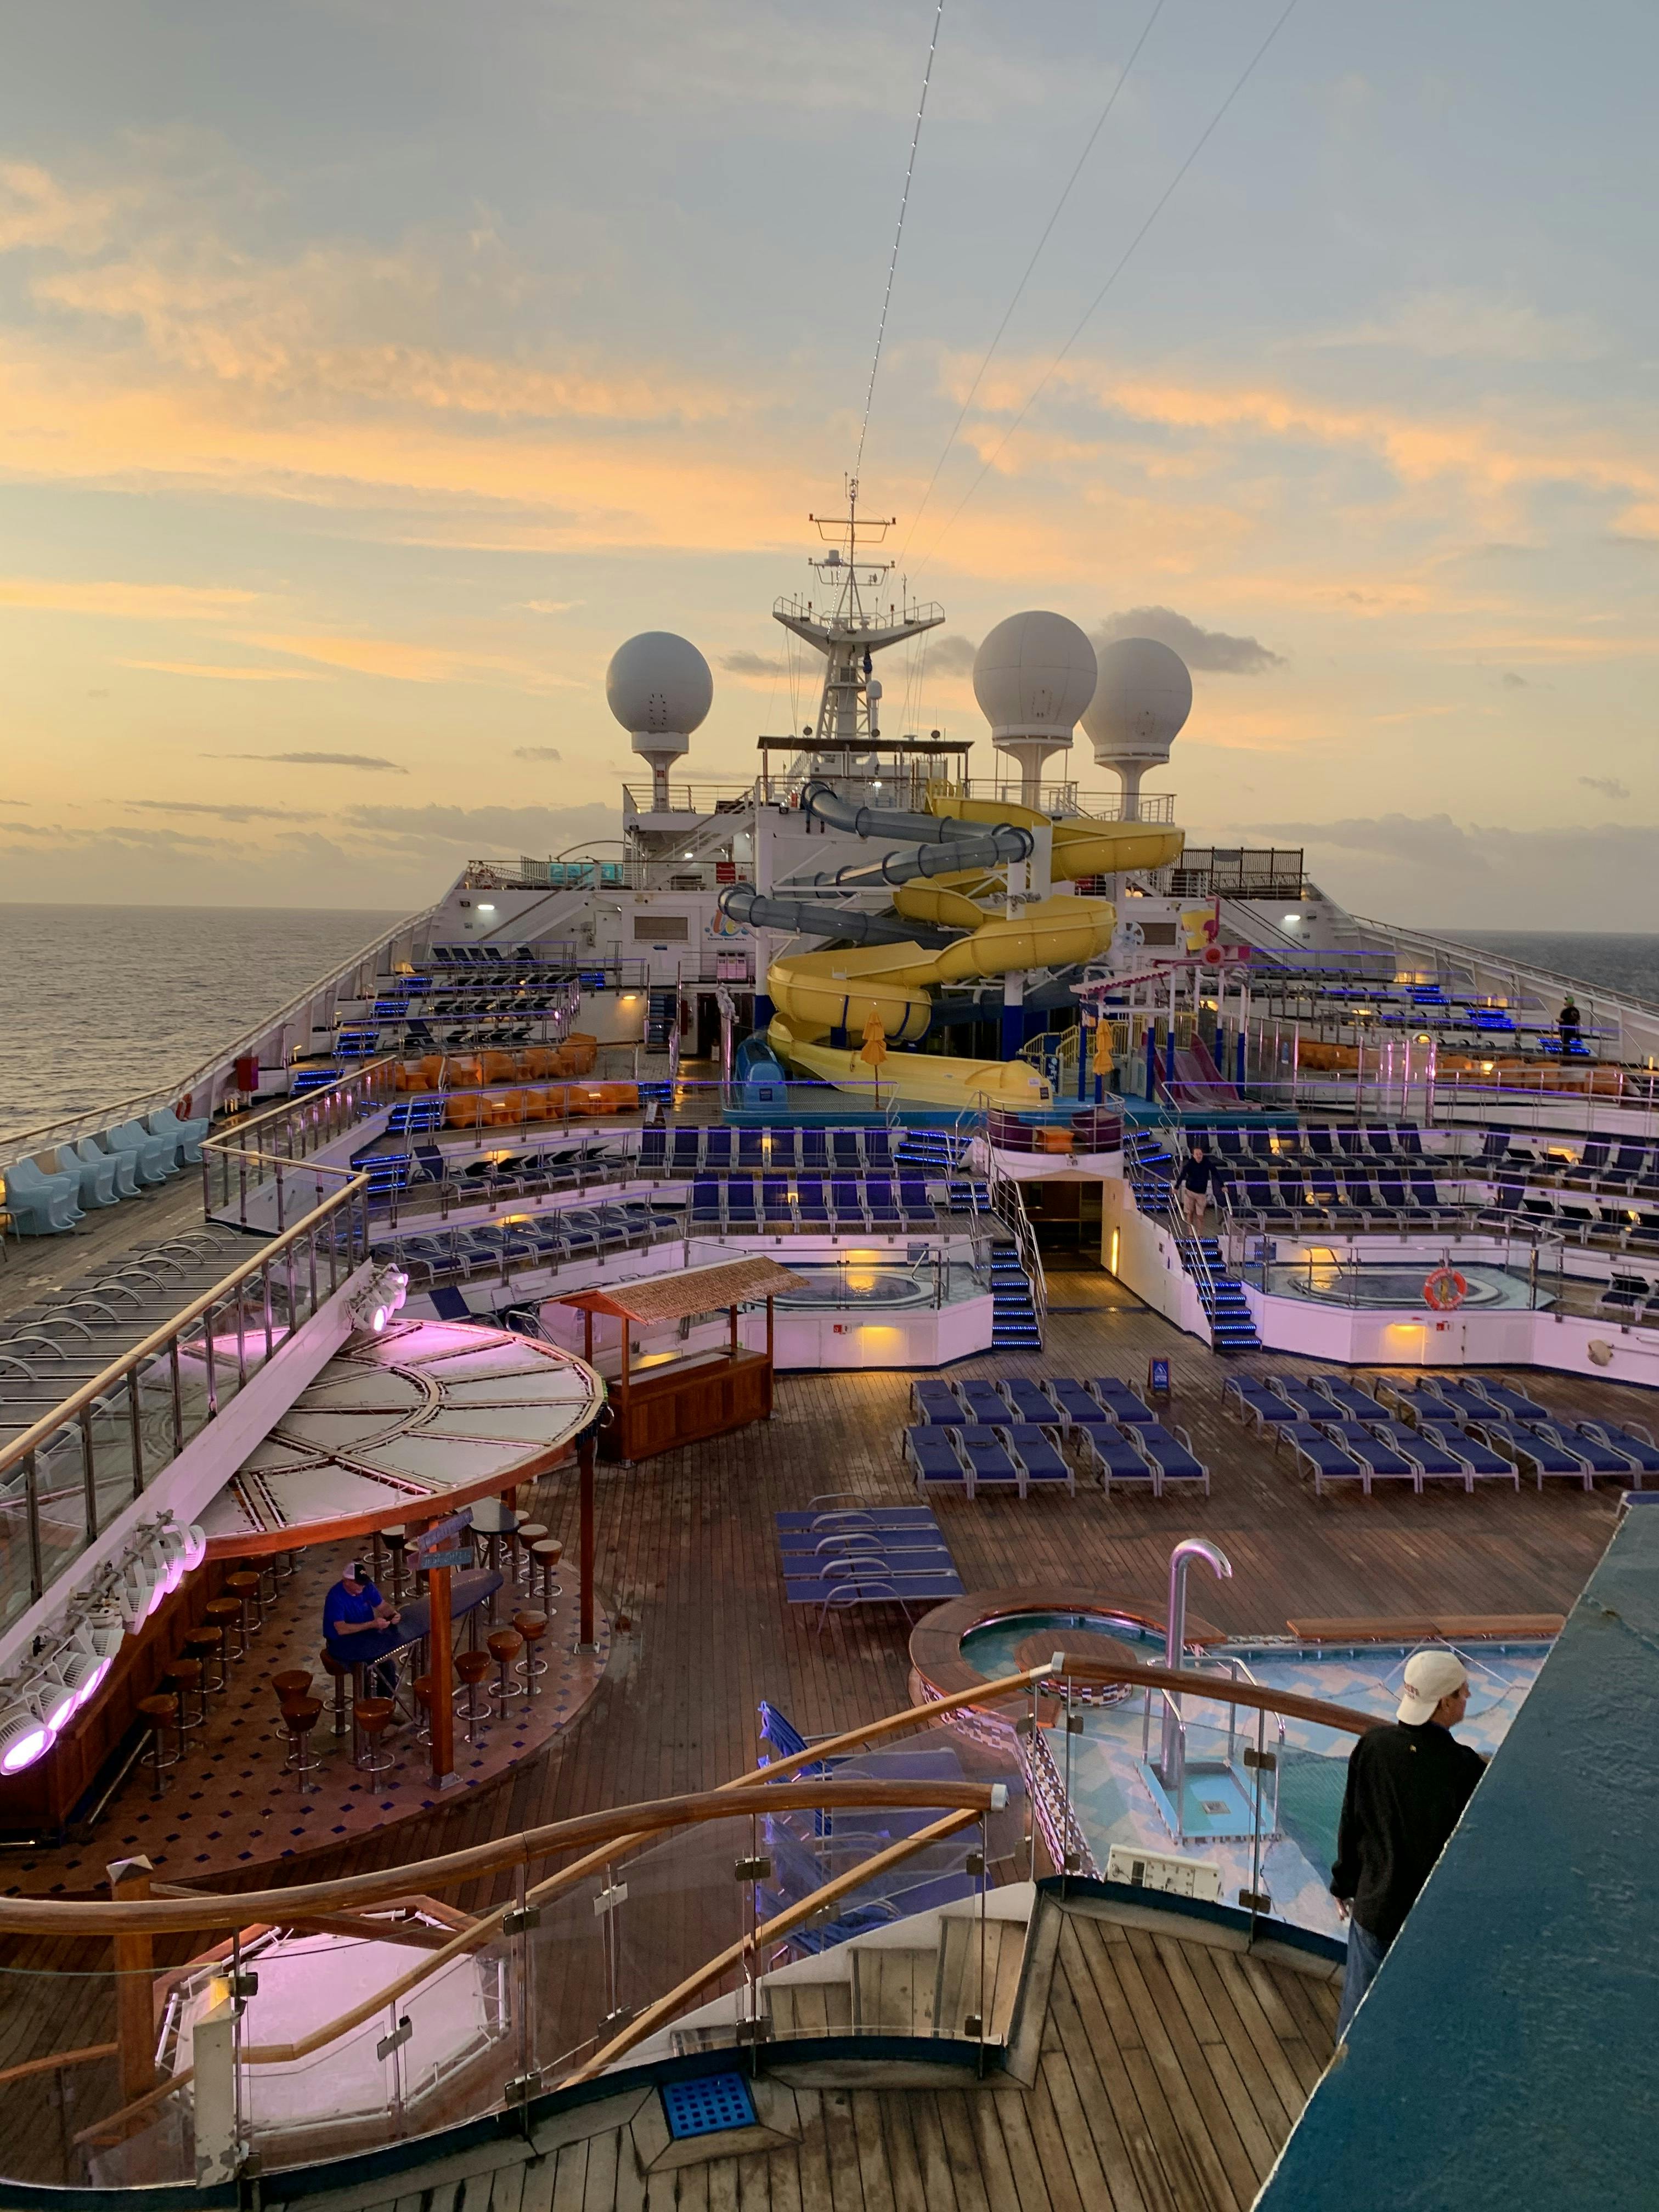 Carnival Glory Cruise Review by Brooke2116 February 23, 2020